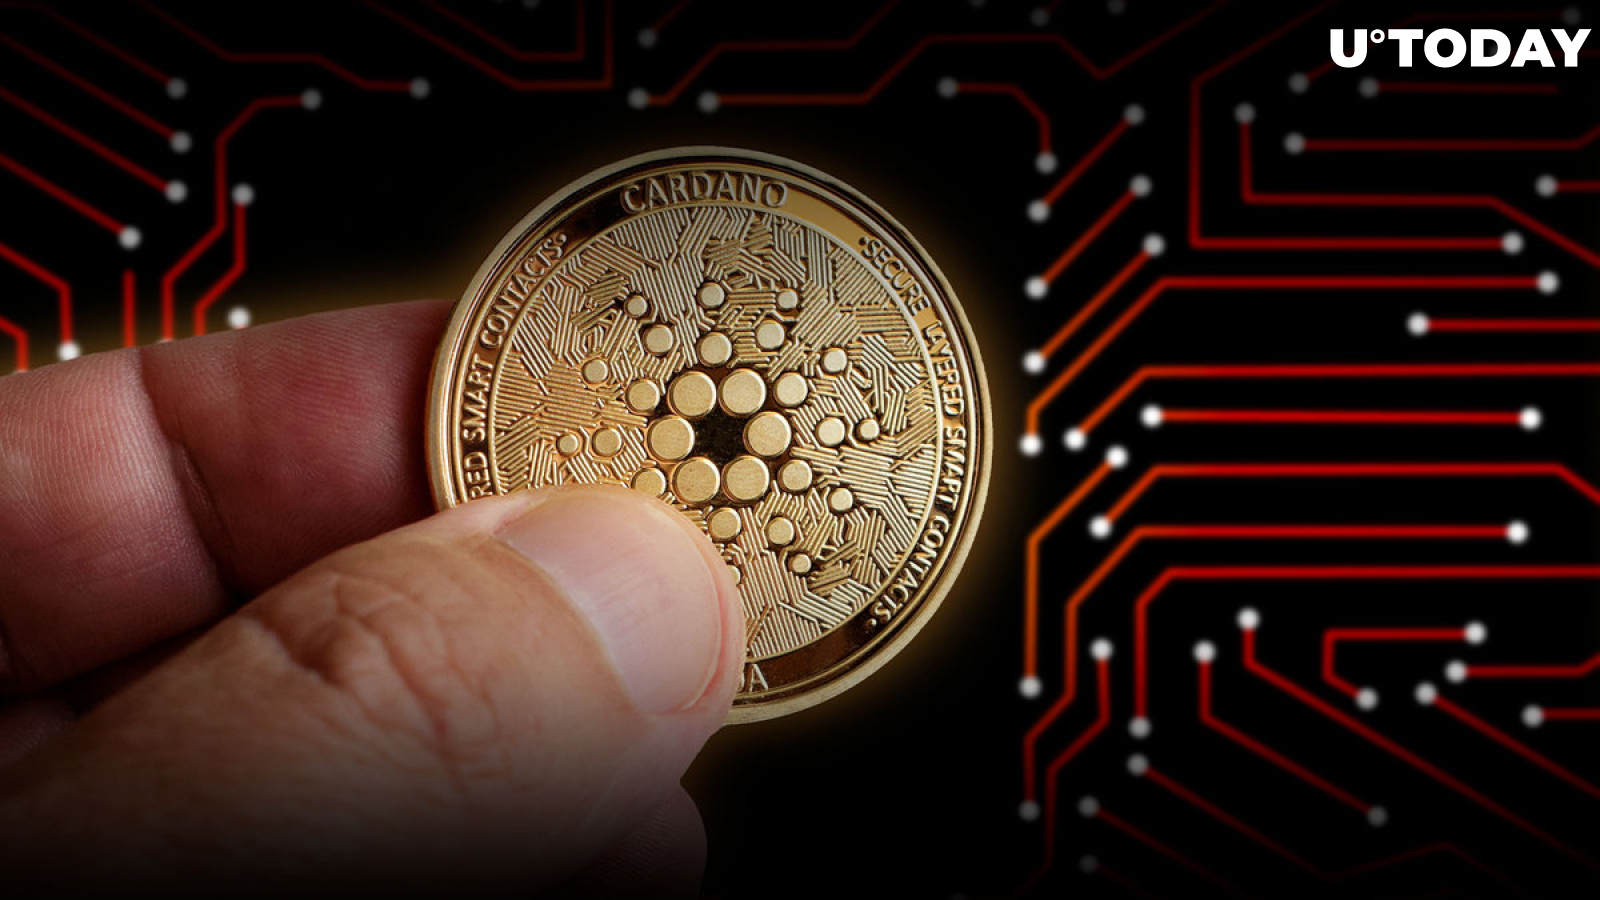 Cardano Sets New Milestone in Native Tokens Issued Following On-chain Growth in August